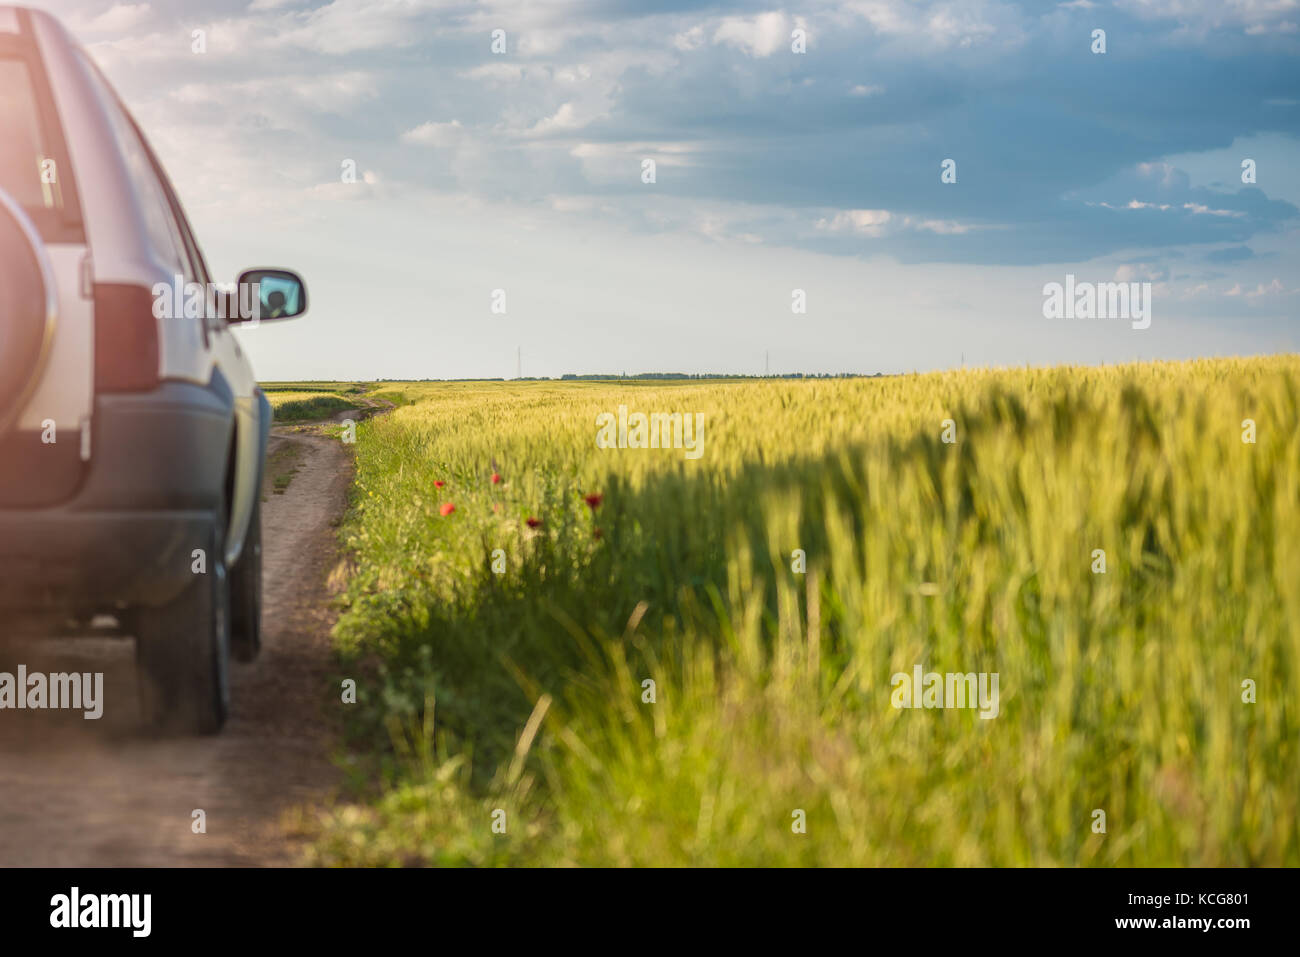 Truck on a dusty gravel road driving through wheat fields Stock Photo